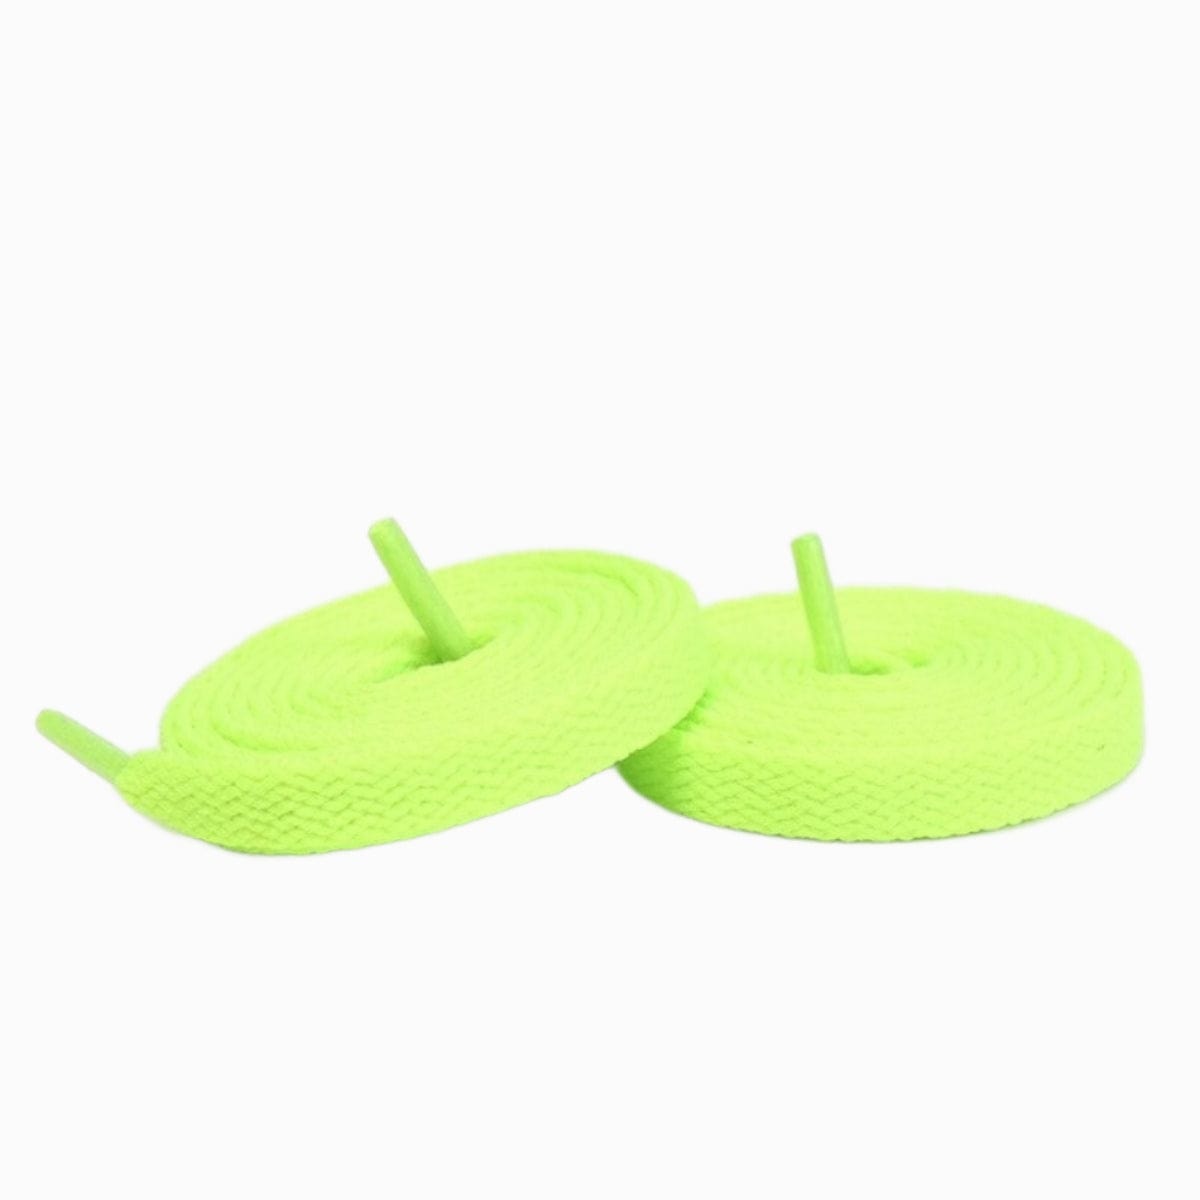 Fluorescent Green Replacement Adidas Shoe Laces for Adidas Handball Spezial Sneakers by Kicks Shoelaces